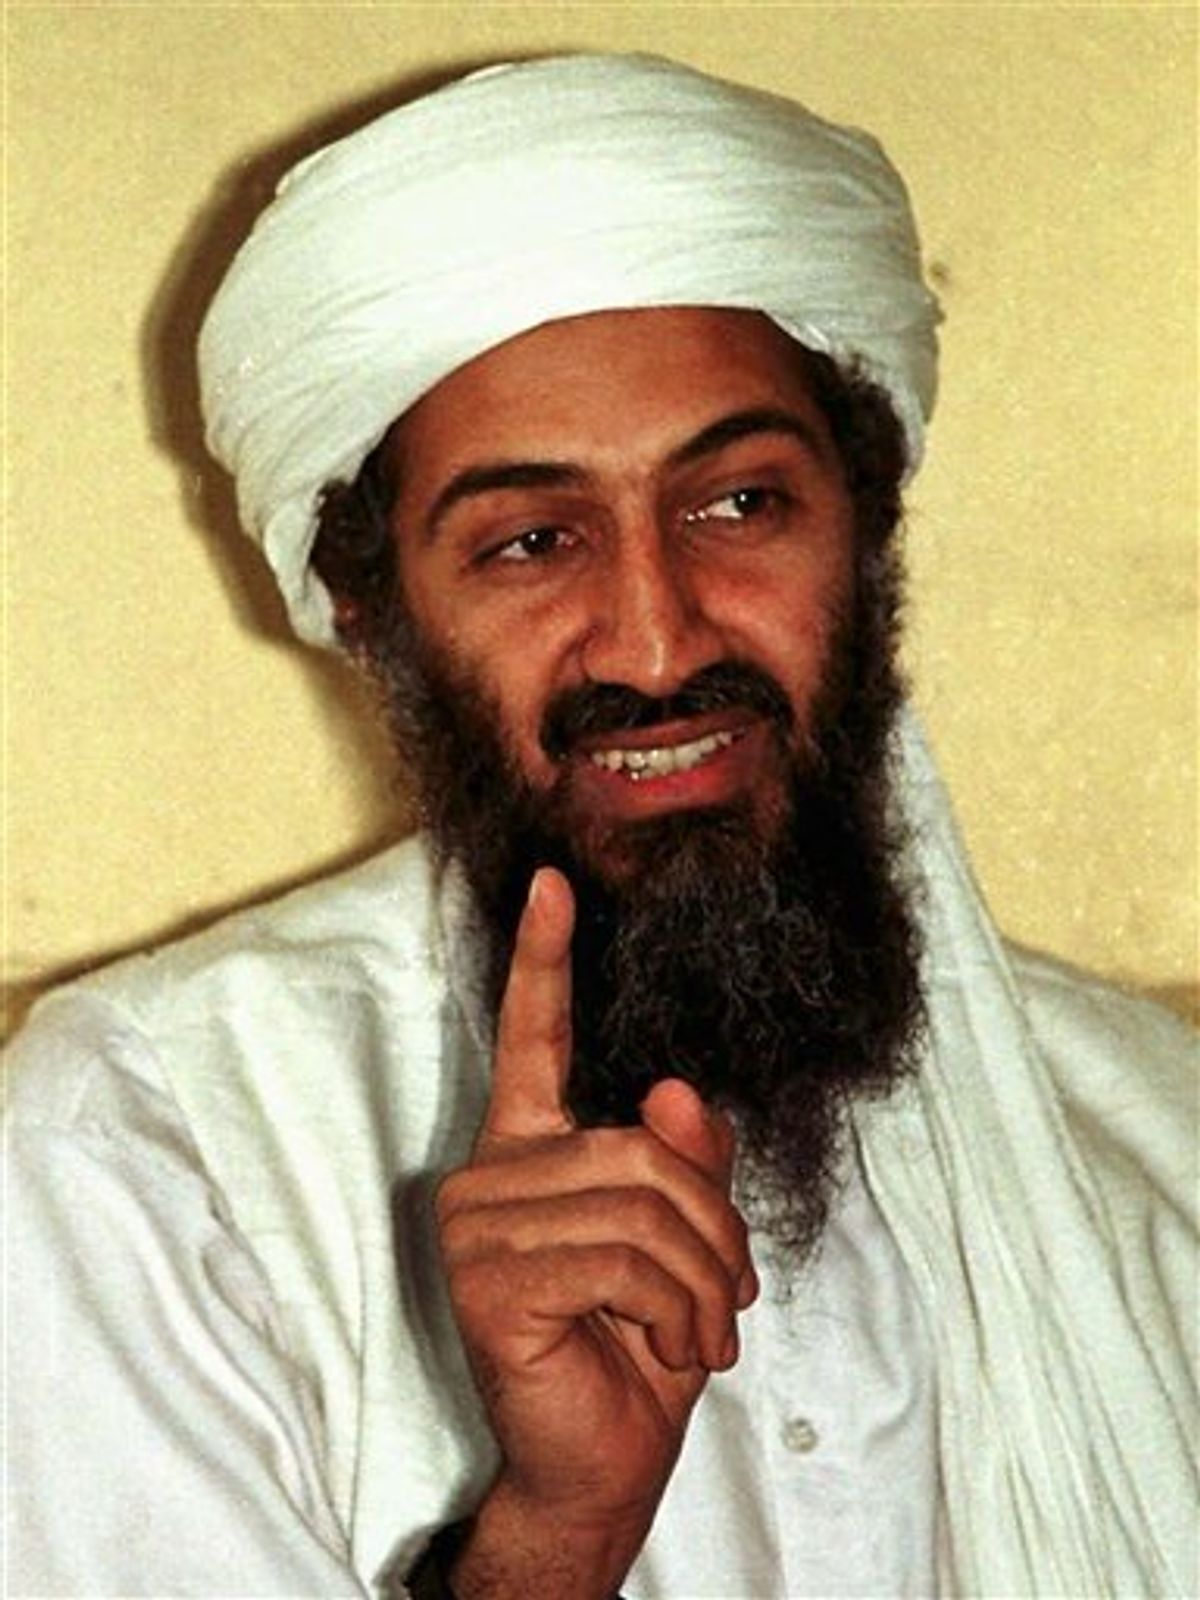 FILE- In this April 1998 file photo, exiled Saudi dissident Osama bin Laden is seen in this April 1998 picture in Afghanistan. Osama bin Laden's Yemeni wife once dismissed the terror leader's offer to return to the safety of her home, saying she wanted to stay and be "martyred" alongside her husband, her family says. In interviews with The Associated Press, Amal al-Sada's relatives paint a portrait of an ambitious, resolute and conservative young woman told friends and family she hoped to "go down in history" after her marriage to the world's most wanted man. (AP Photo, File) (AP)